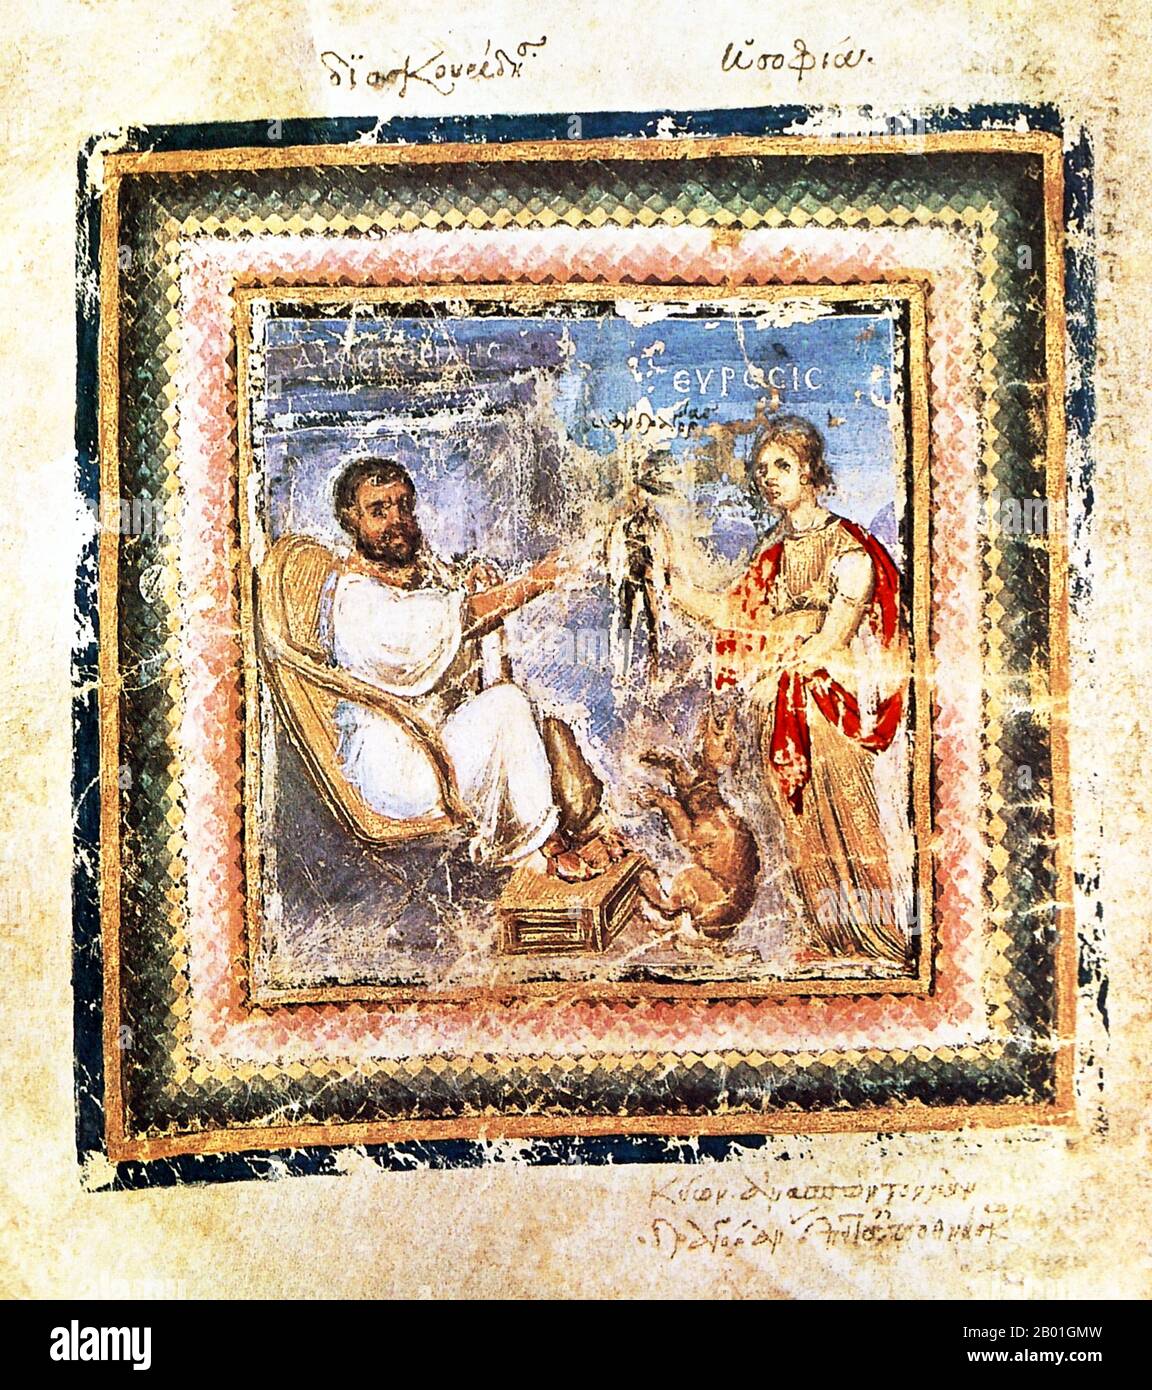 Greece/Byzantium/Turkey: Heuresis (right) present Dioscorides (left) with a mandrake root, from the Codex Vienna Dioscorides, 512 CE.  The first author picture from the Vienna Dioscorides (fol. 4 verso): Heuresis (the personification of discovery) presents the physician Dioscorides with a mandrake root. Since these should emit a deadly scream when harvested, they were pulled out of the ground by a dog. Heurensis therefore has the dead animal lying at her feet.  The Vienna Dioscurides/Dioscorides is an early 6th century illuminated manuscript of De Materia Medica by Pedanius Dioscorides. Stock Photo